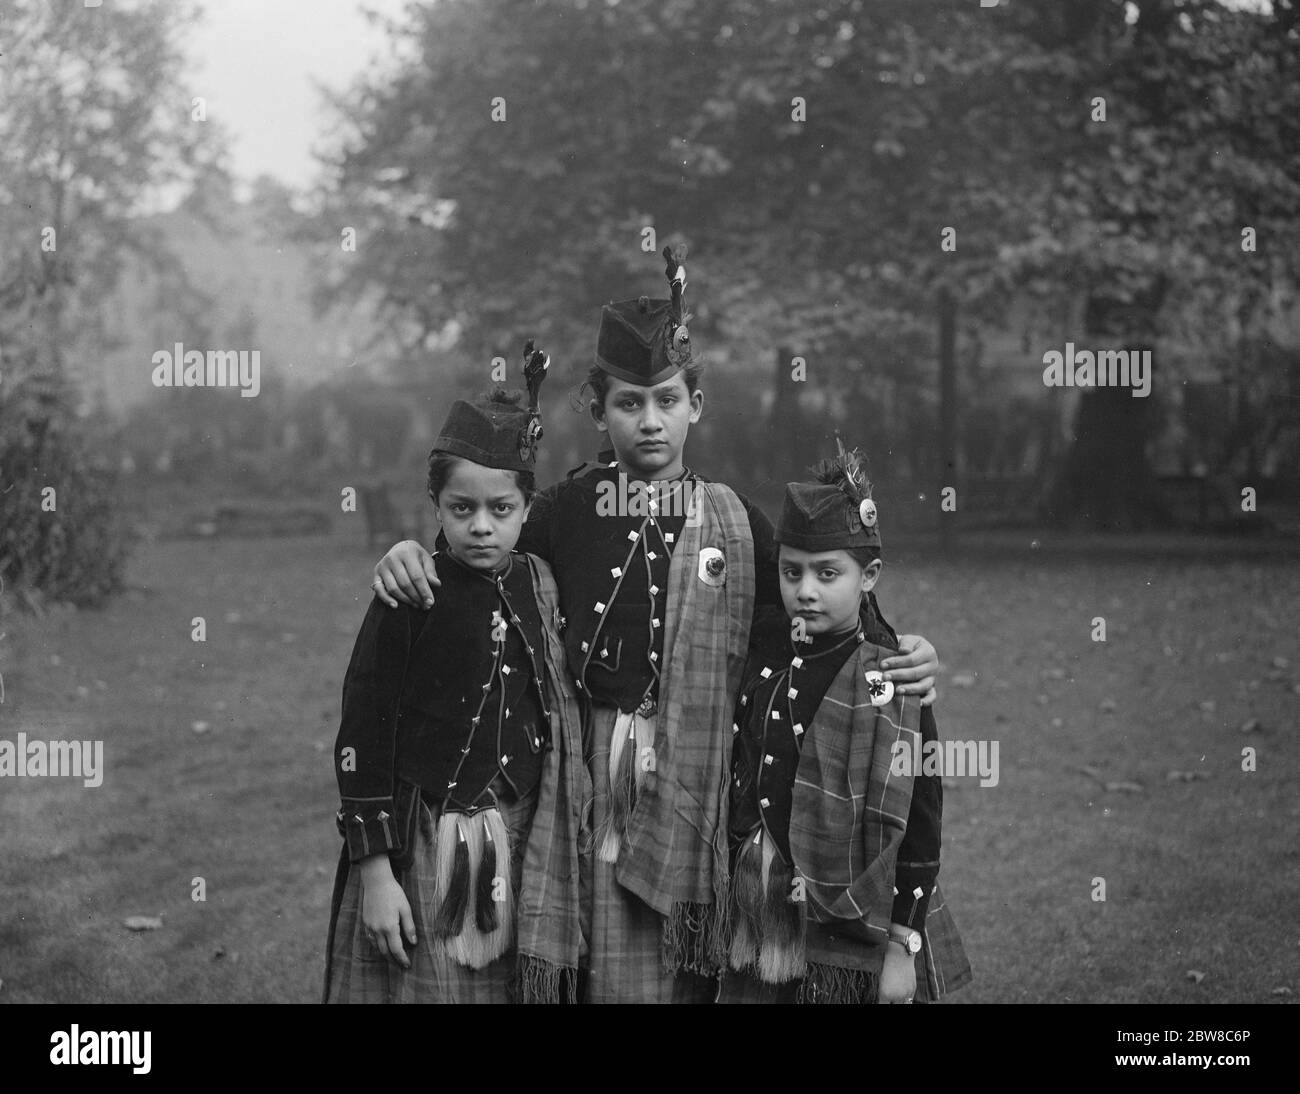 The three granddaughters of the Begum of Bhopal photographed at Portman Square . Left to right : Princess Ajida Sultan ( aged 10 ) , Princess Abida Ids Sultan ( aged 12 ) and Princess Rabia Sultan ( aged 9 ) . 7 October 1925 Stock Photo